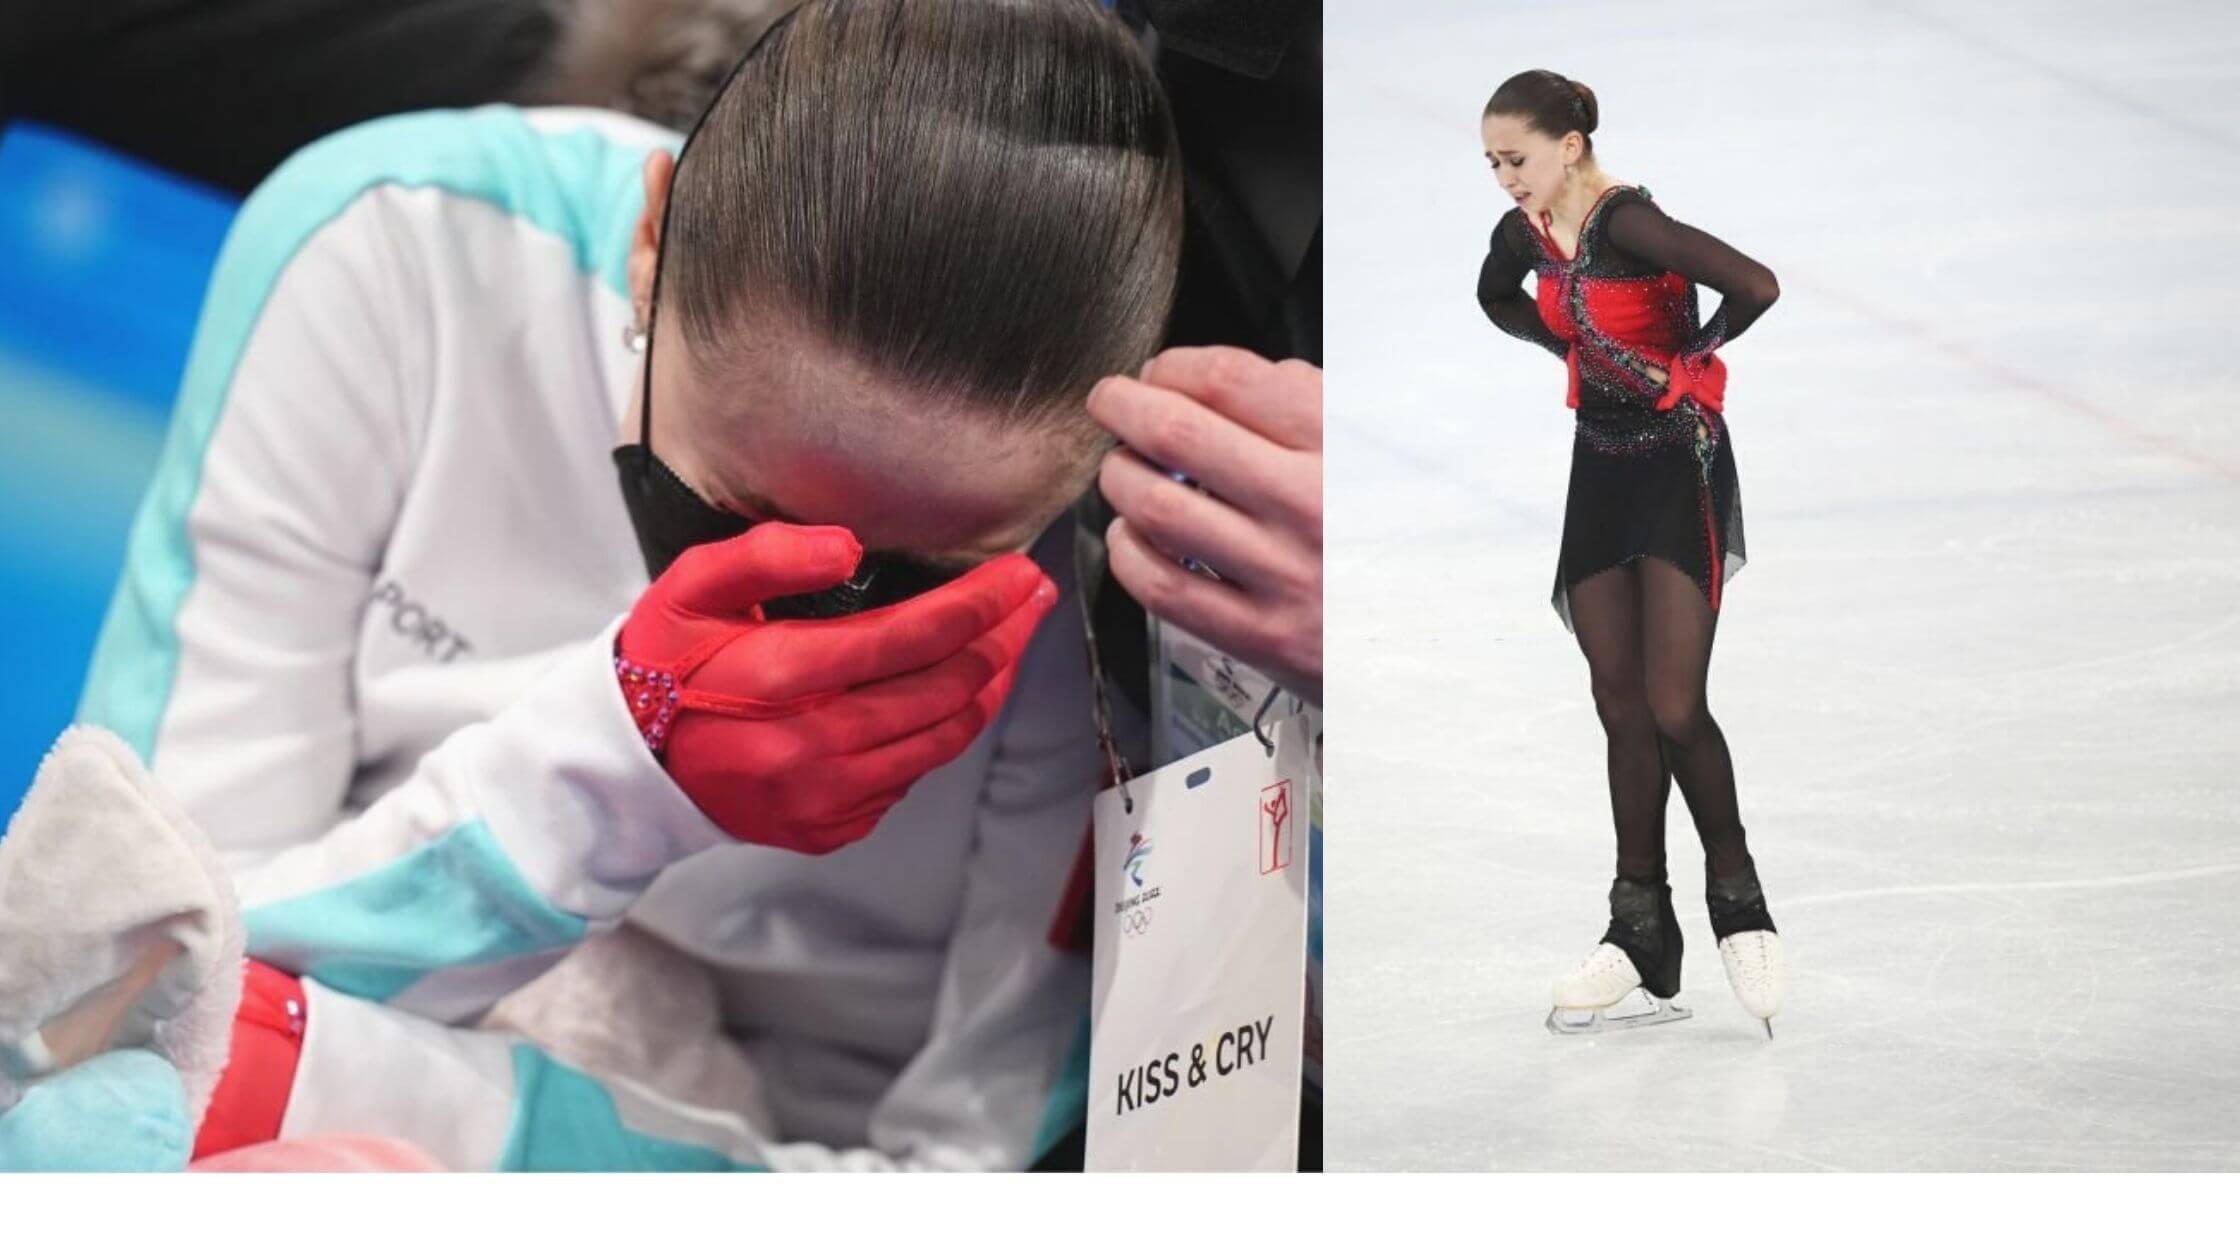 Women’s Free Skate Ends In Tears And Sobs: Russia’s Kamila Valieva Stumbles And Falls During The Event, Ends Up In The Fourth Position